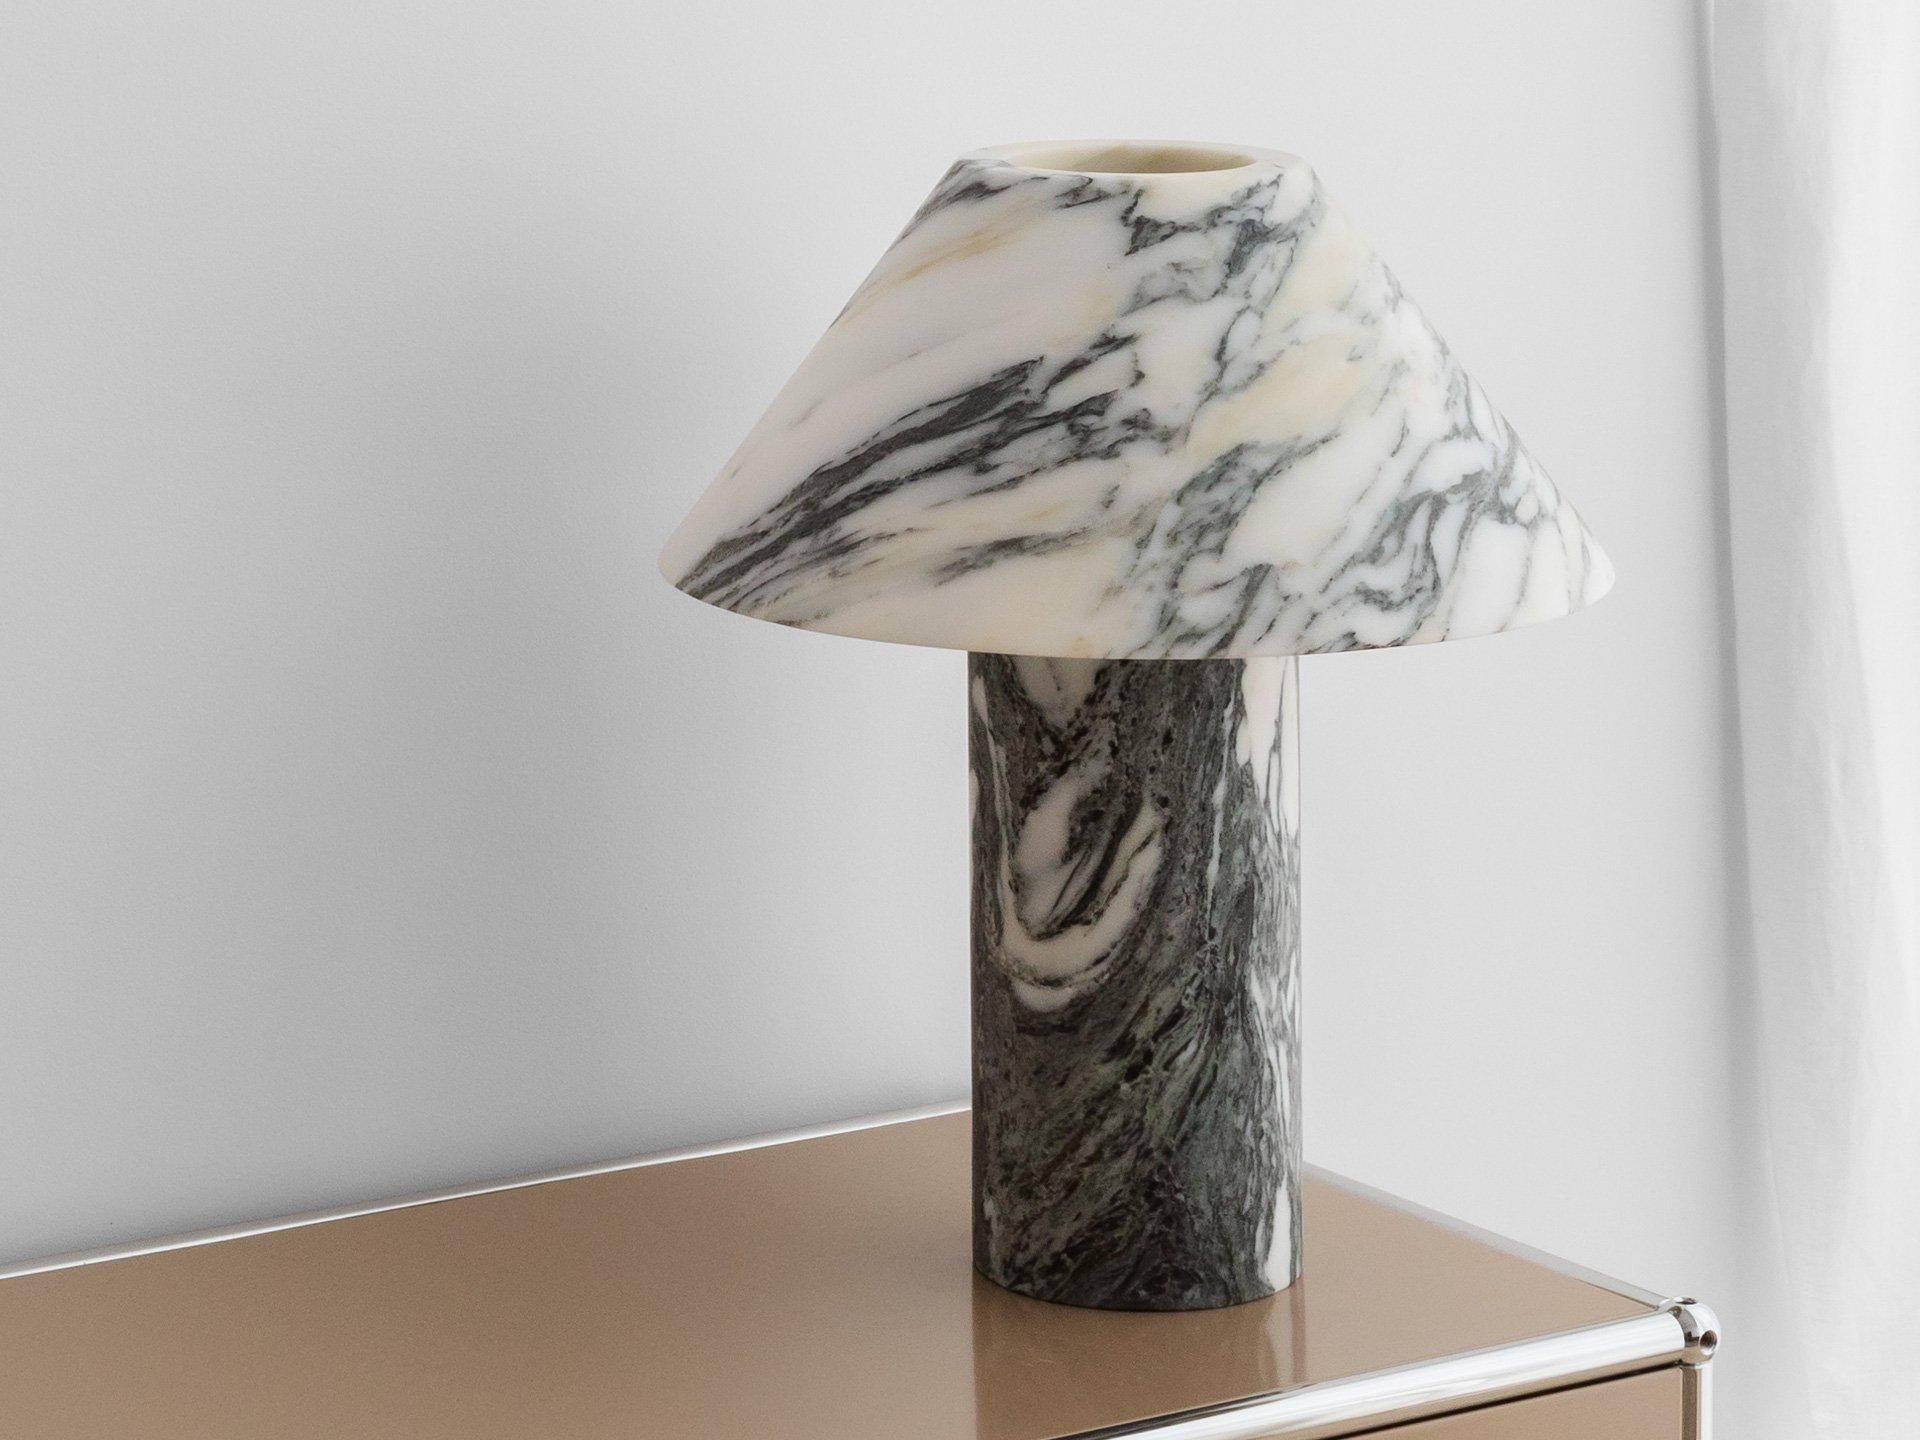 Large Arabescato Pillar Lamp by Henry Wilson
Dimensions: D 35 x H 40 cm
Materials: Arabescato Marble

Pillar Lamp is hewn from two pieces of solid Arabescato Marble. It is heavy and will require care in transport and a sturdy surface to display.